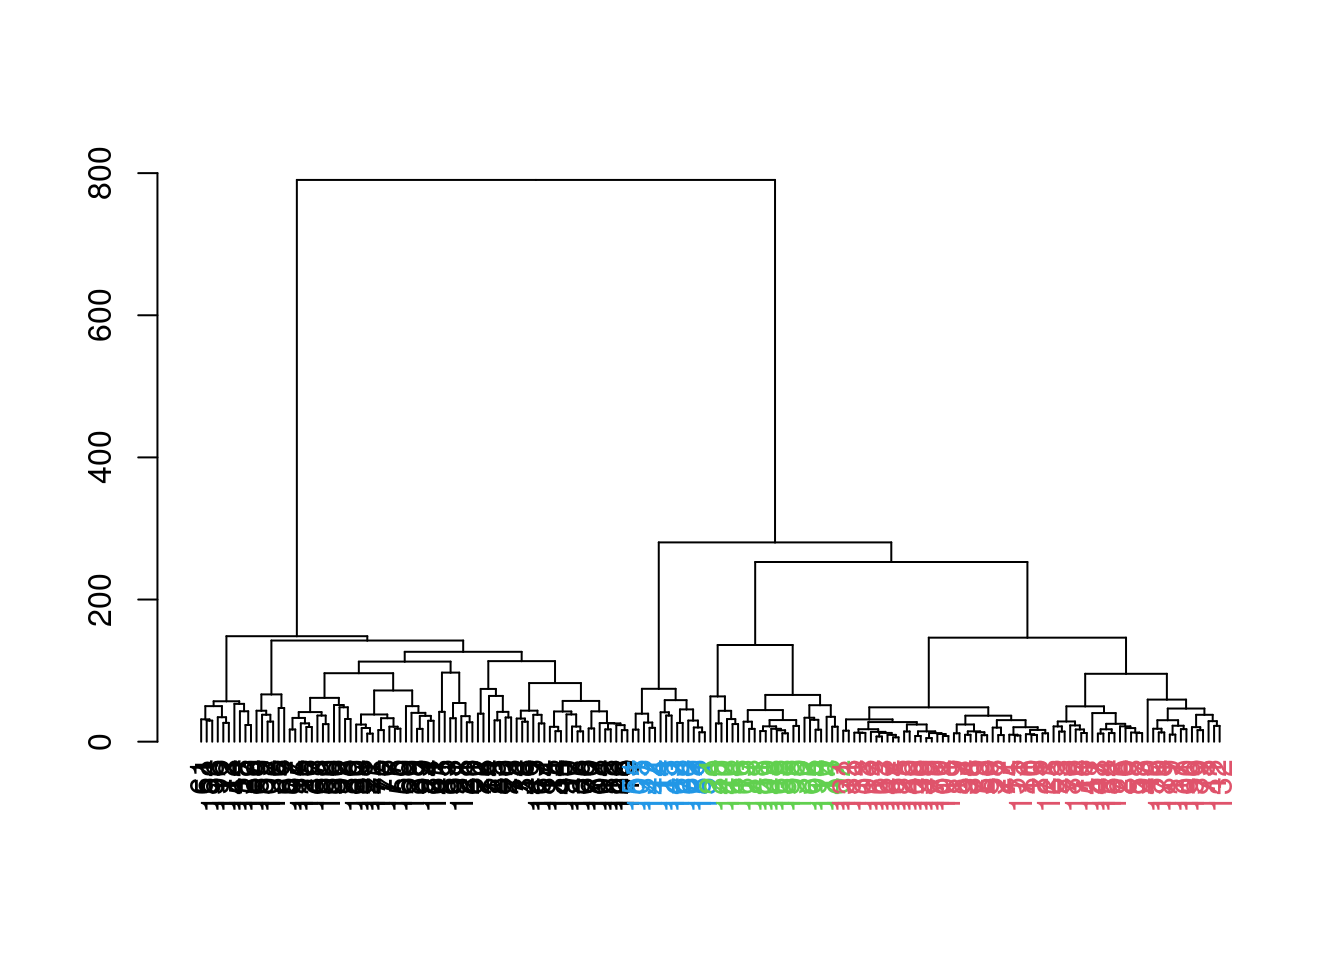 Hierarchy of cells in the 416B data set after hierarchical clustering, where each leaf node is a cell that is coloured according to its assigned cluster identity from a dynamic tree cut.